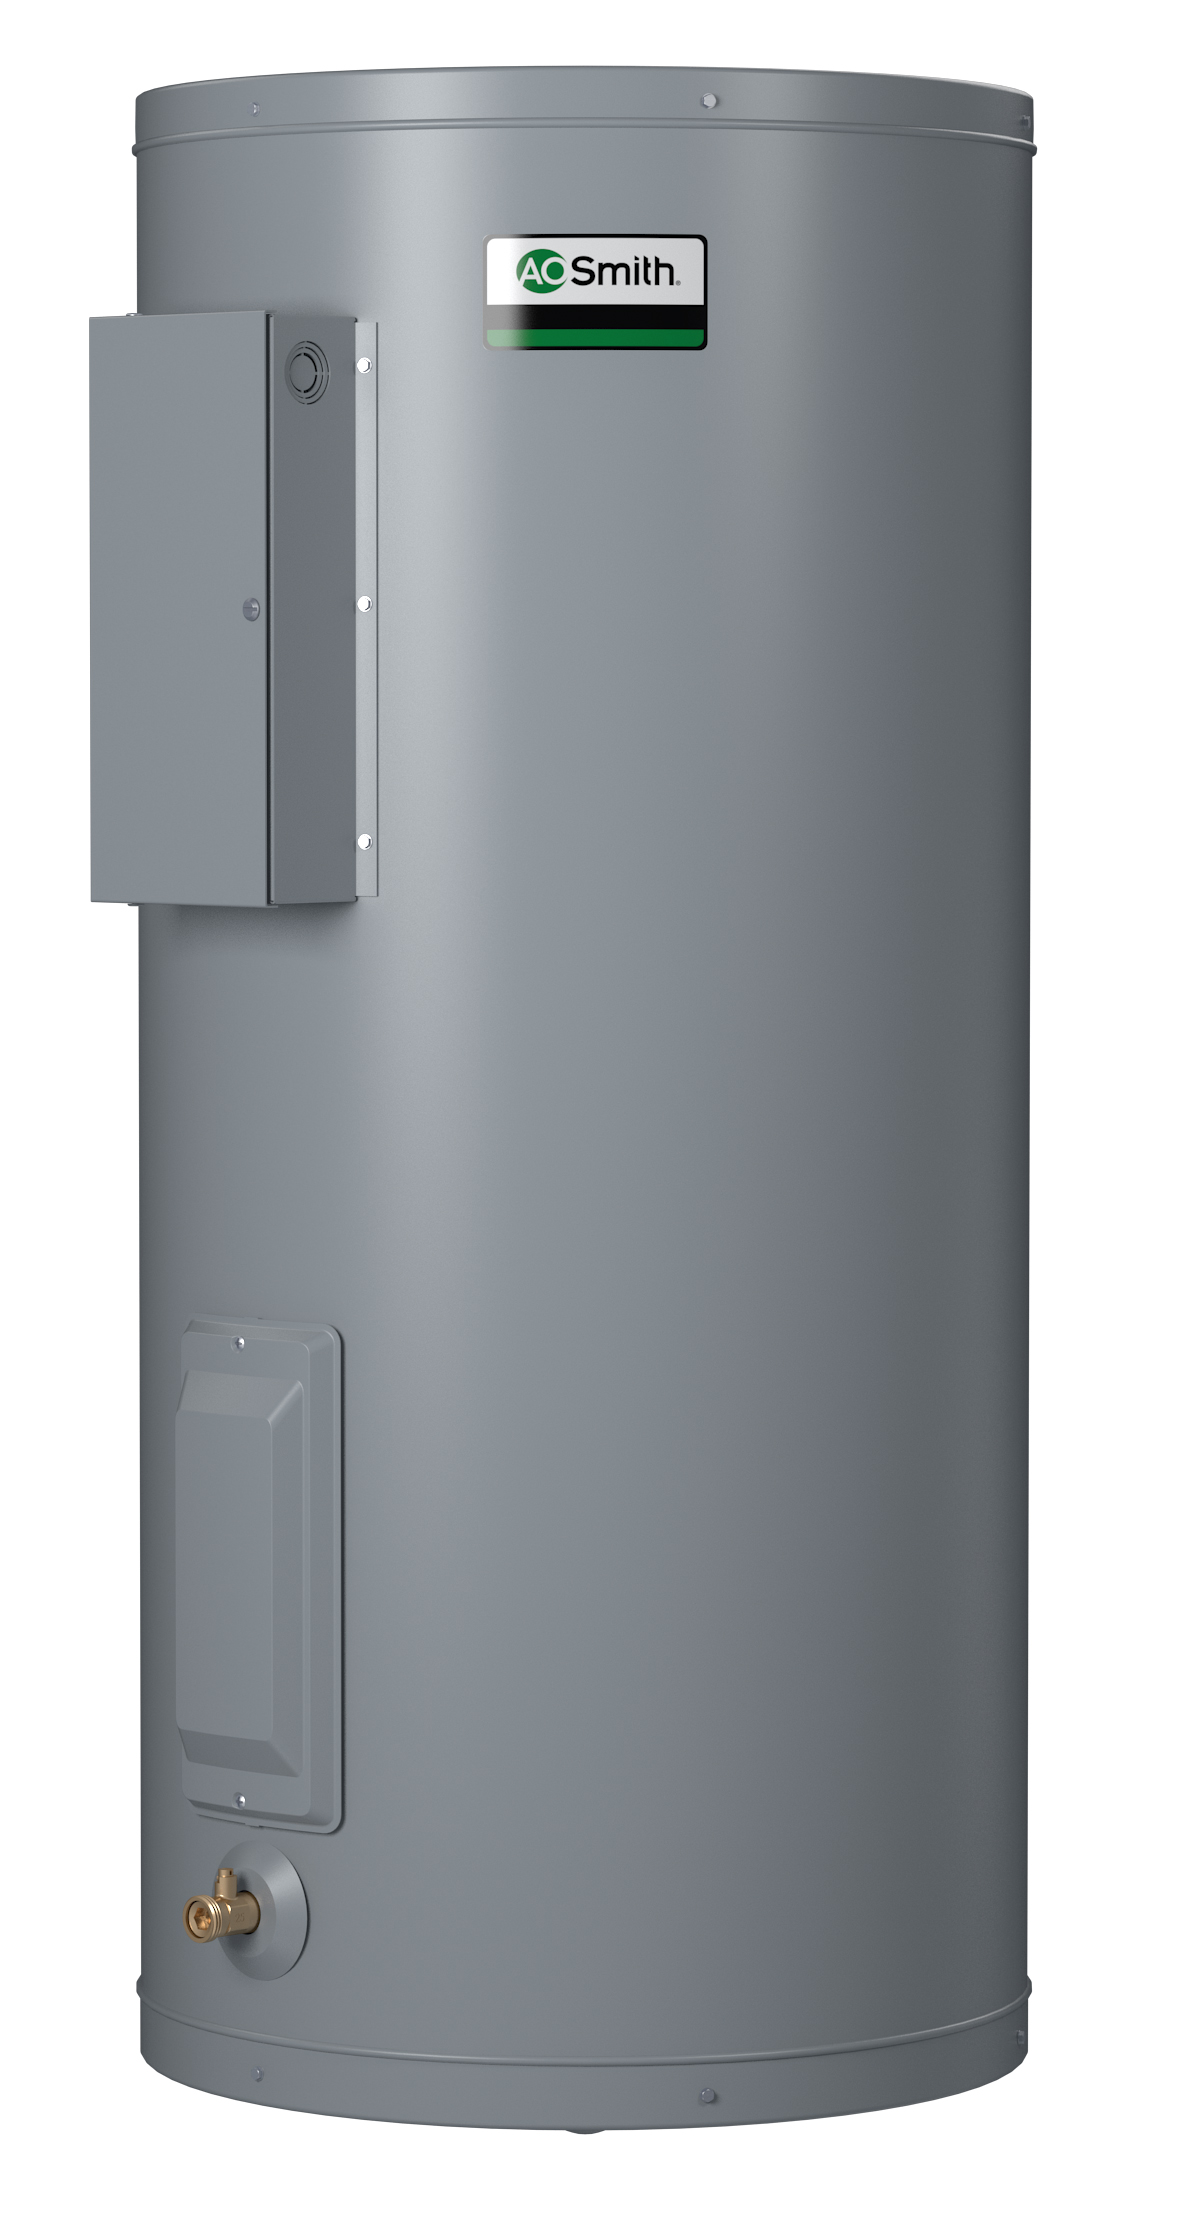 AO SMITH DEL-10S: 10 GALLONS, 1.5KW, 240 VOLT, 6.25 AMPS, 1 PHASE, SINGLE ELEMENT, LIGHT DUTY COMMERCIAL ELECTRIC WATER HEATER, DURA-POWER